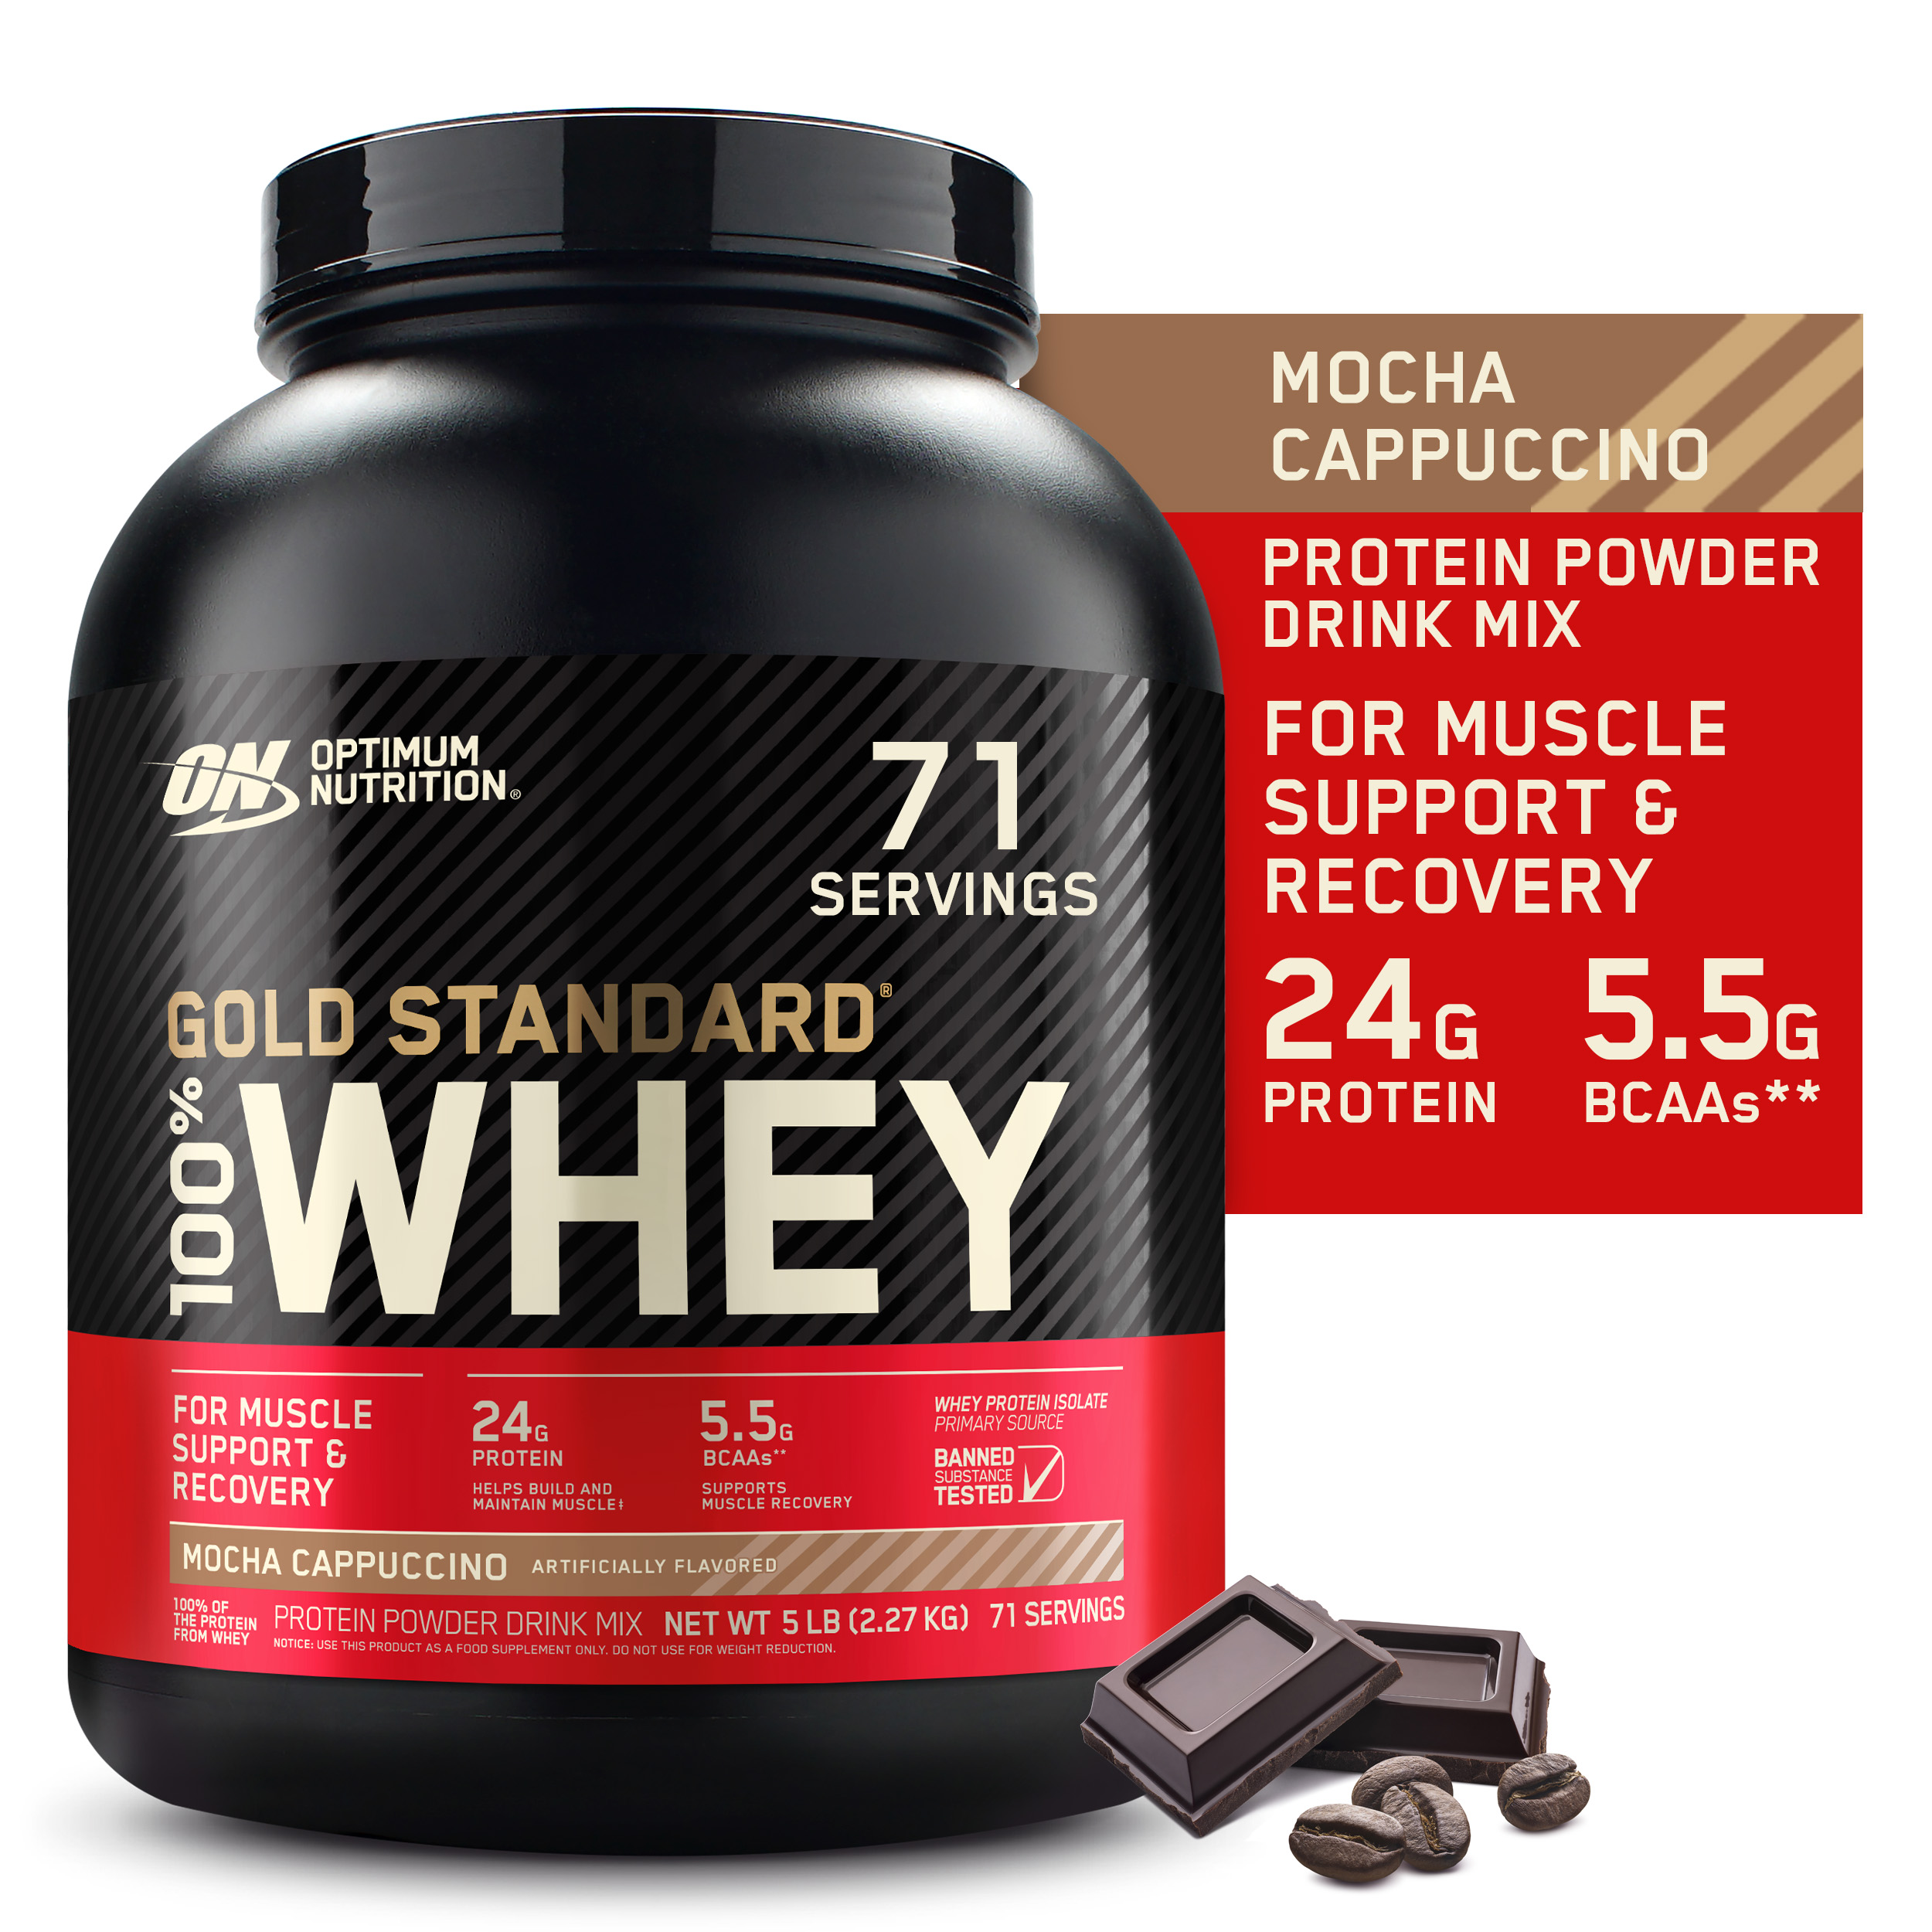 Optimum Nutrition, Gold Standard 100% Whey Protein Powder, Mocha Cappuccino, 5 lb, 71 Servings - image 1 of 11